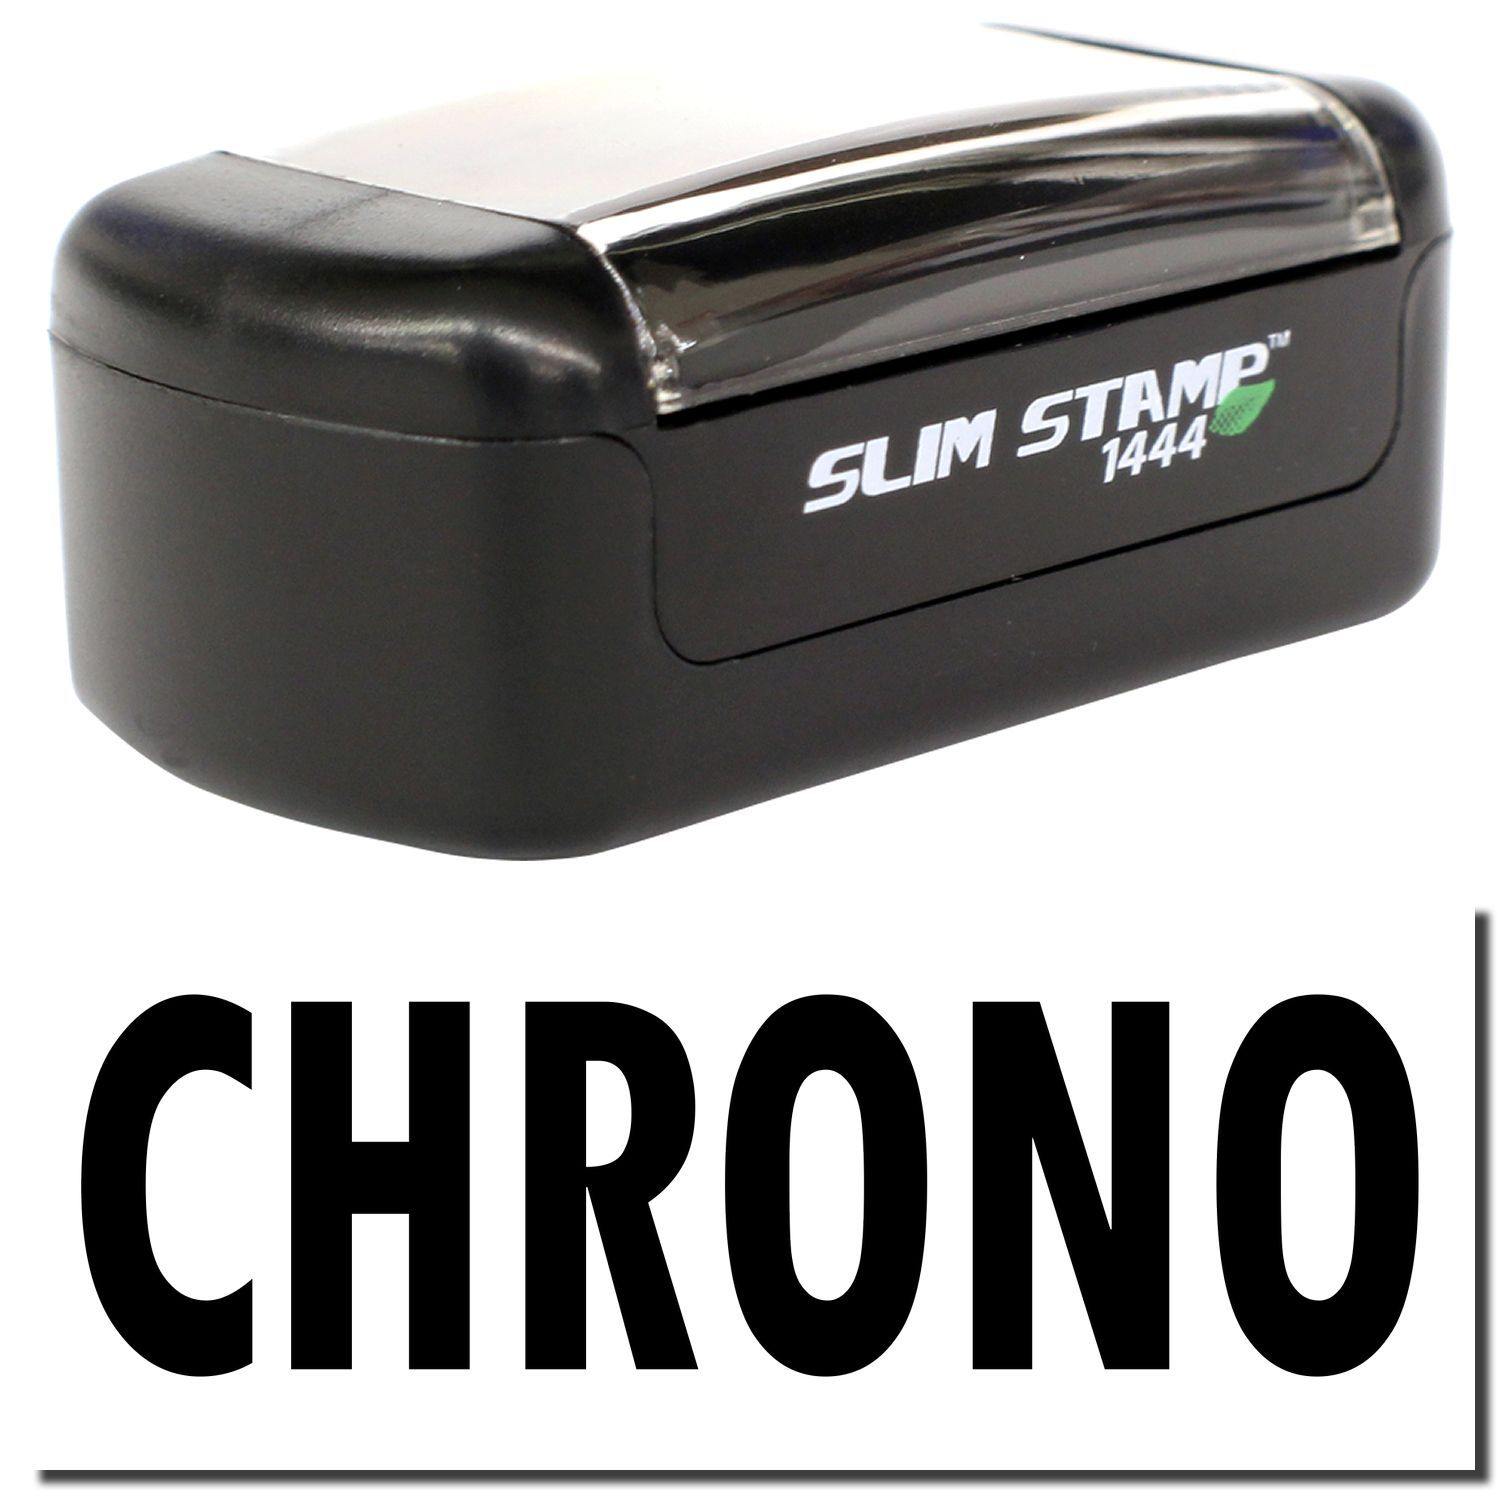 A stock office pre-inked stamp with a stamped image showing how the text "CHRONO" is displayed after stamping.